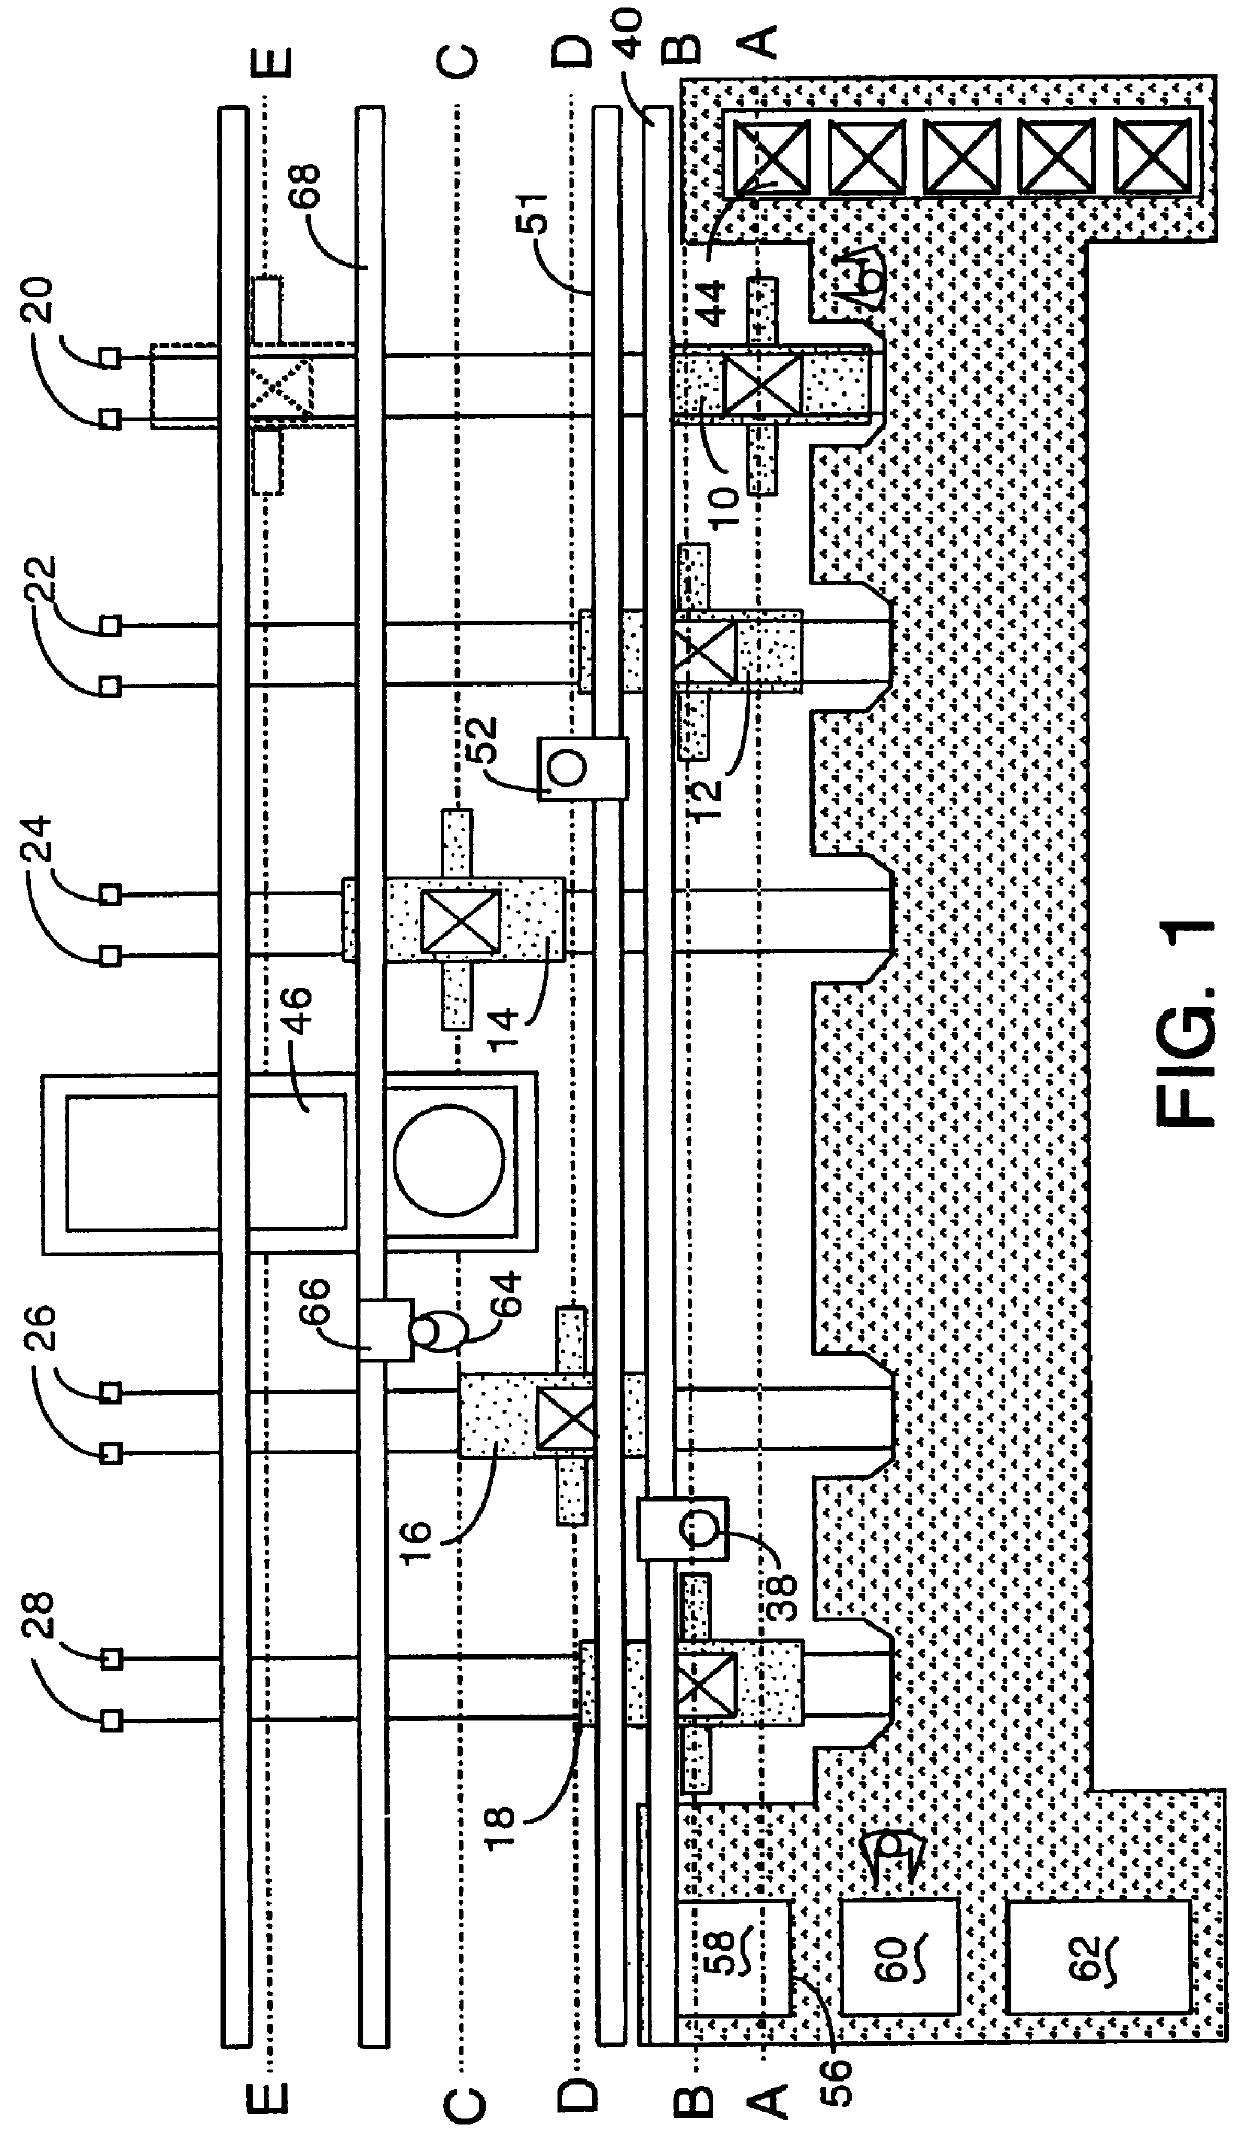 Method and apparatus for production of aluminum alloy castings